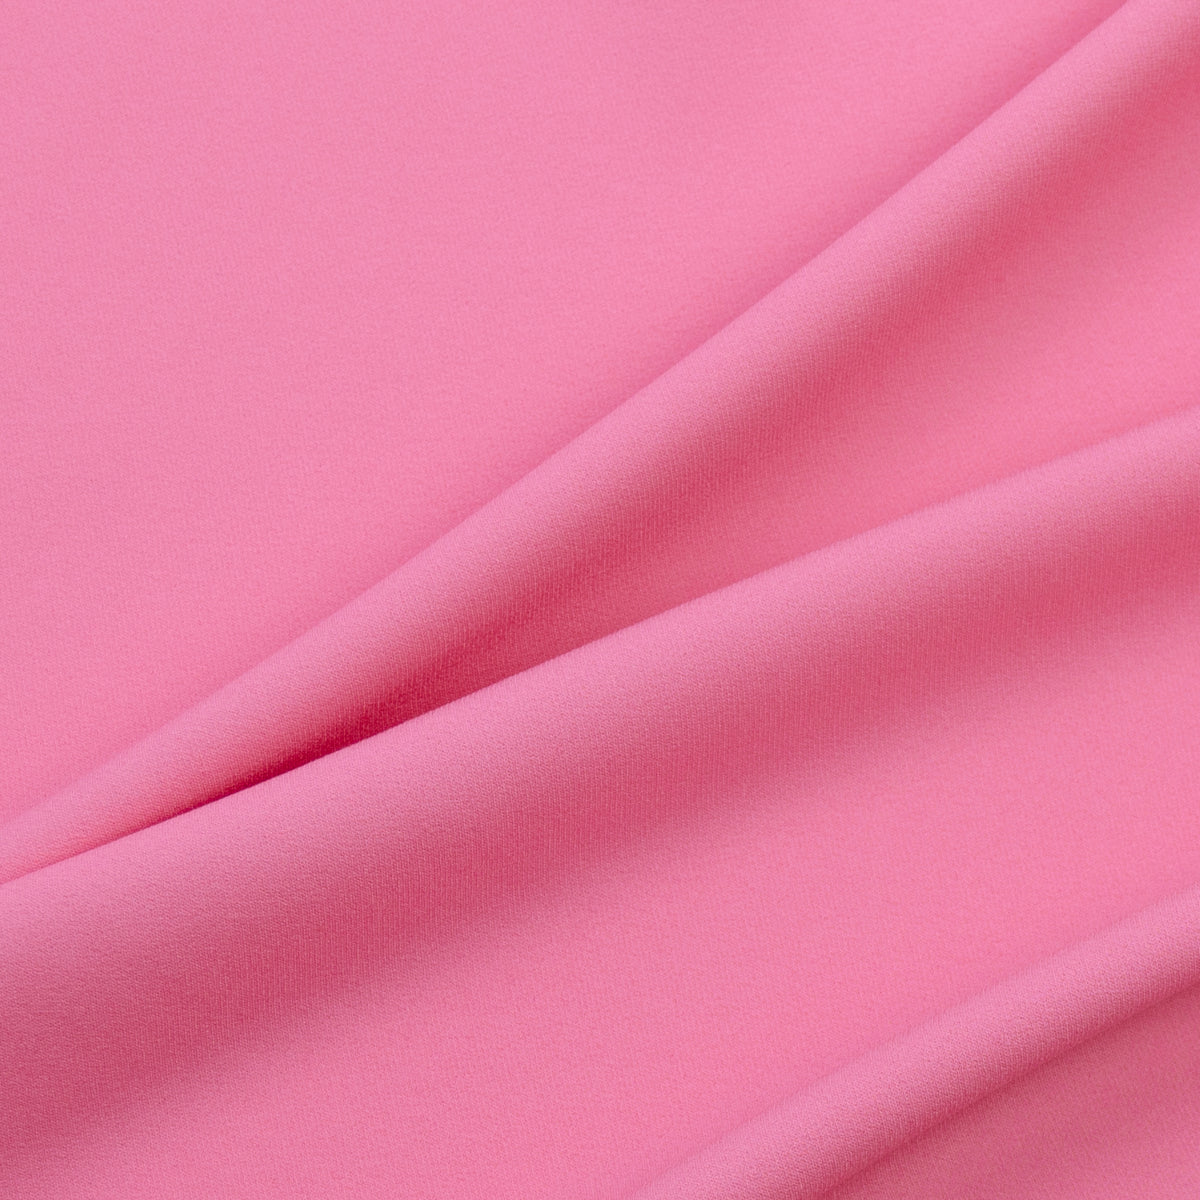 Ted Pink Crepe Sable Viscose | THE FABRIC SALES